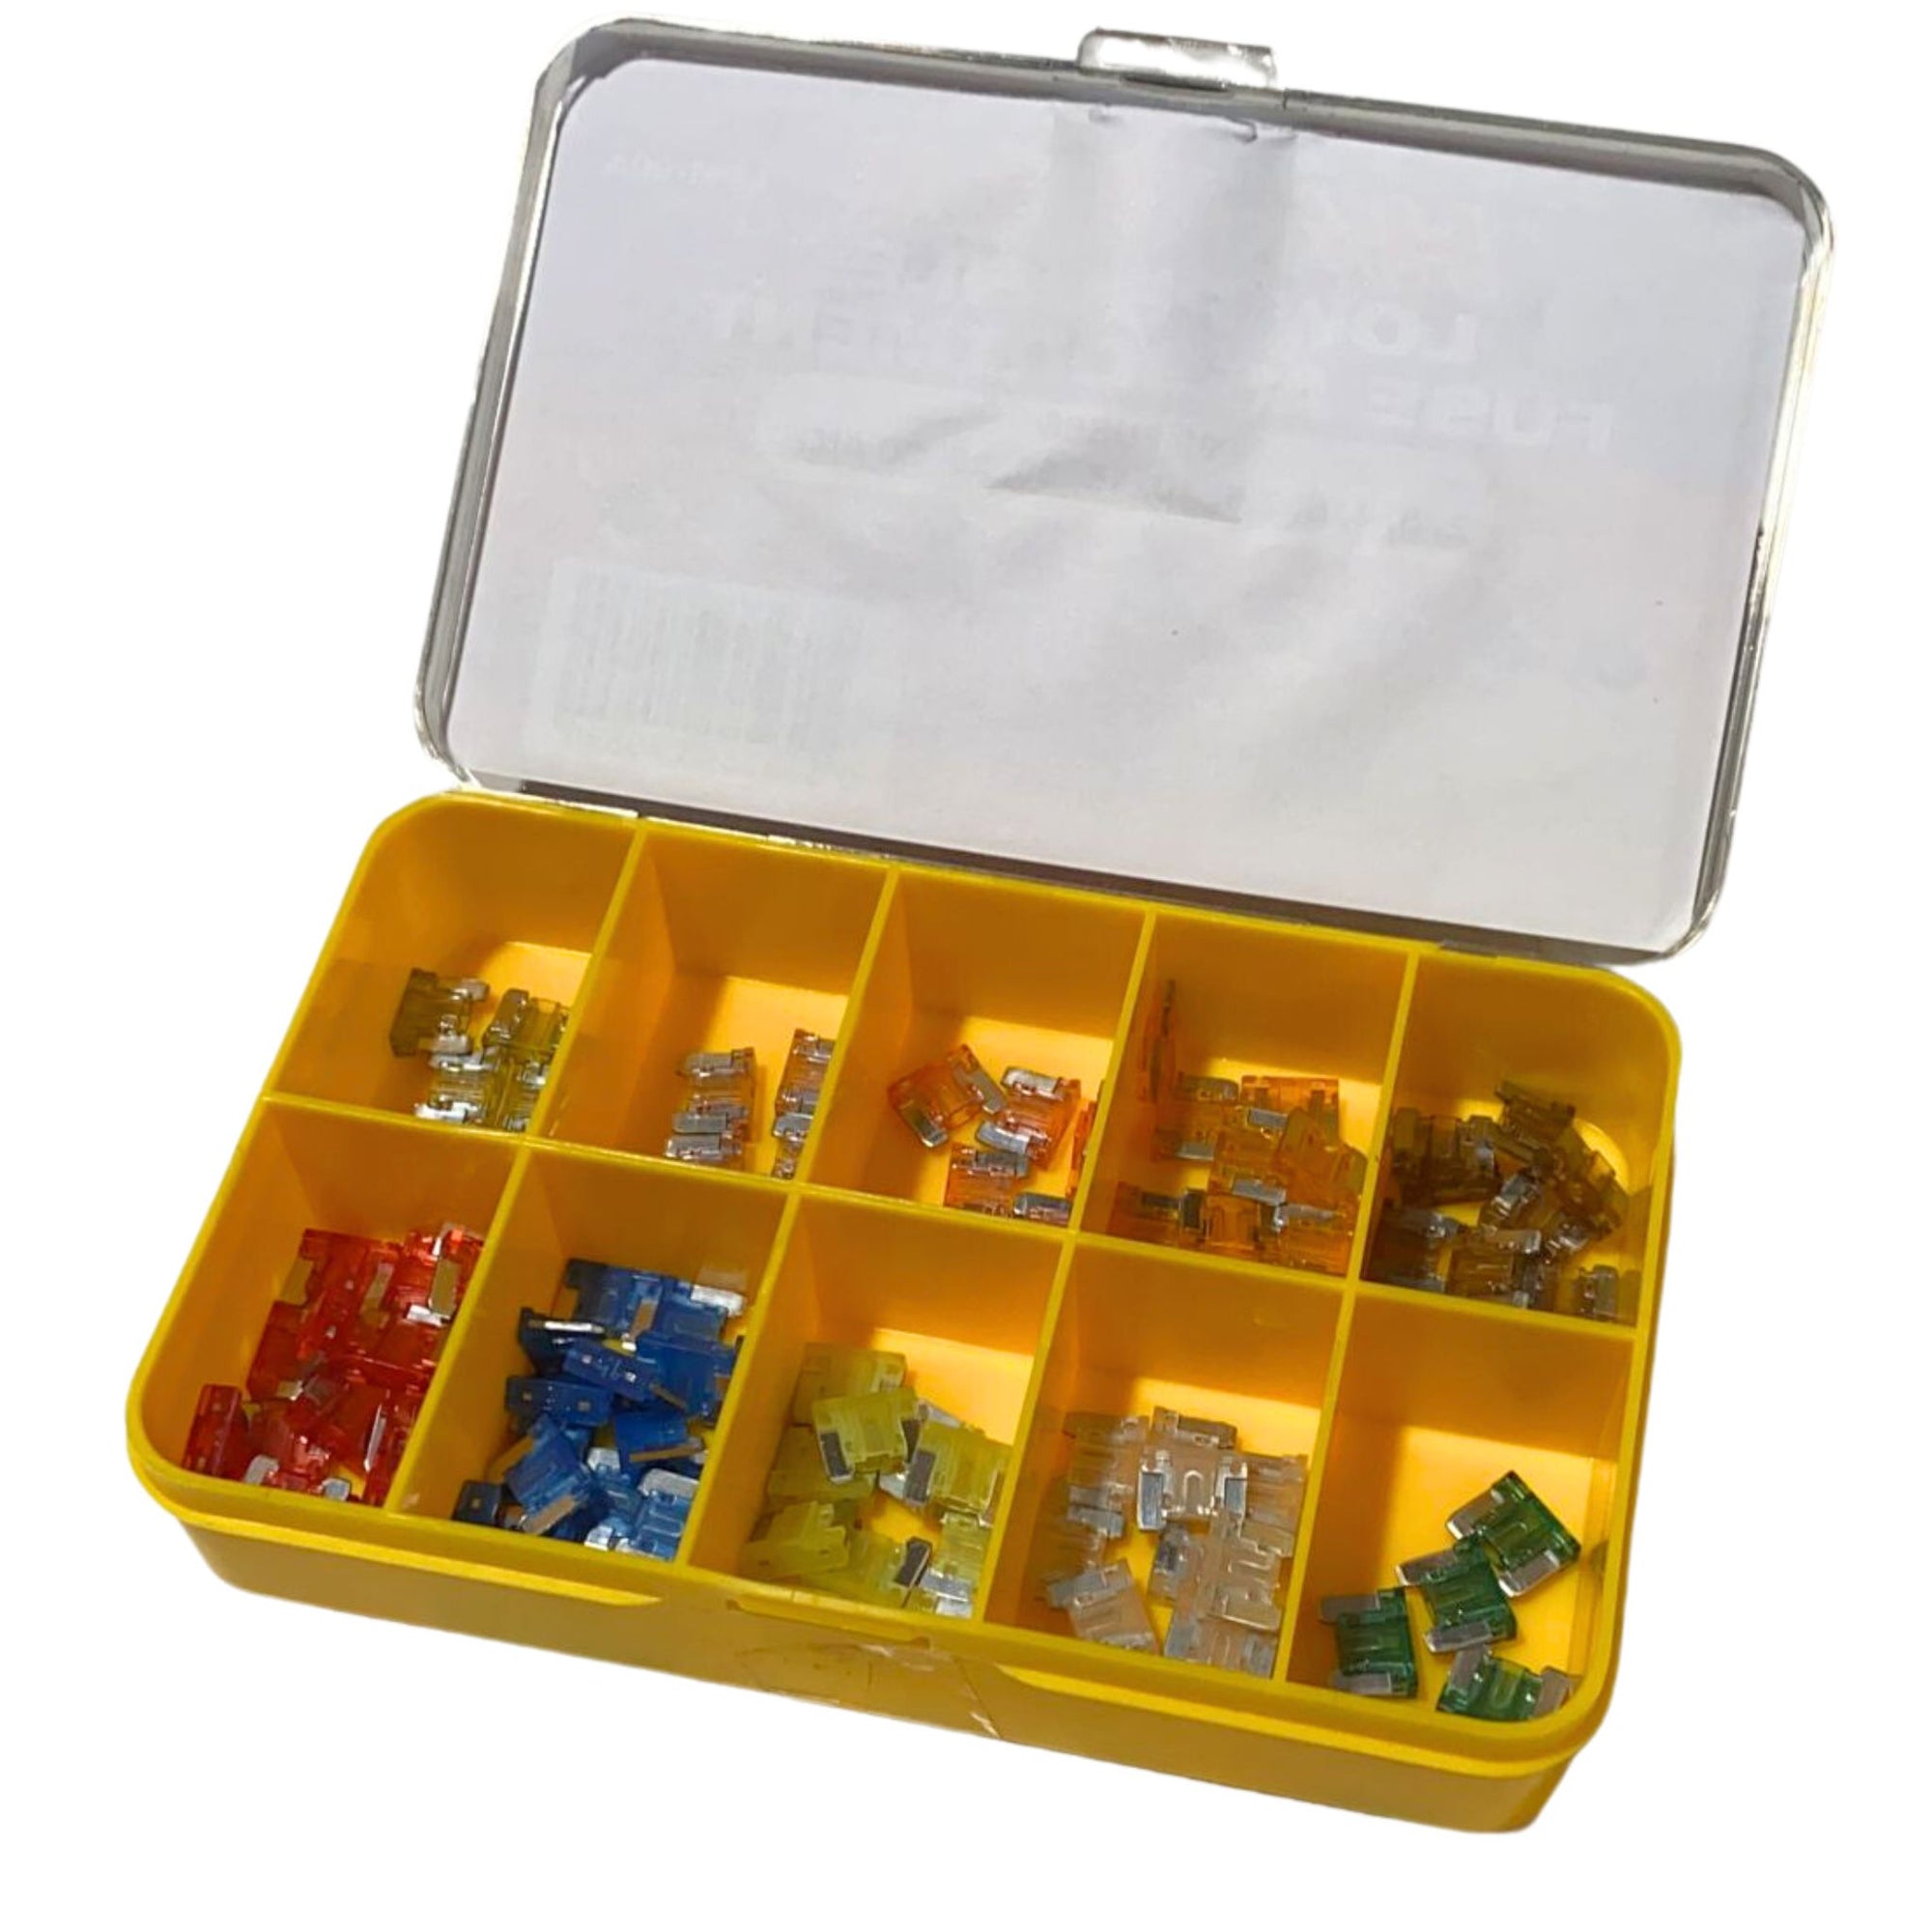 90 pc low profile fuse assortment kit - South East Clearance Centre